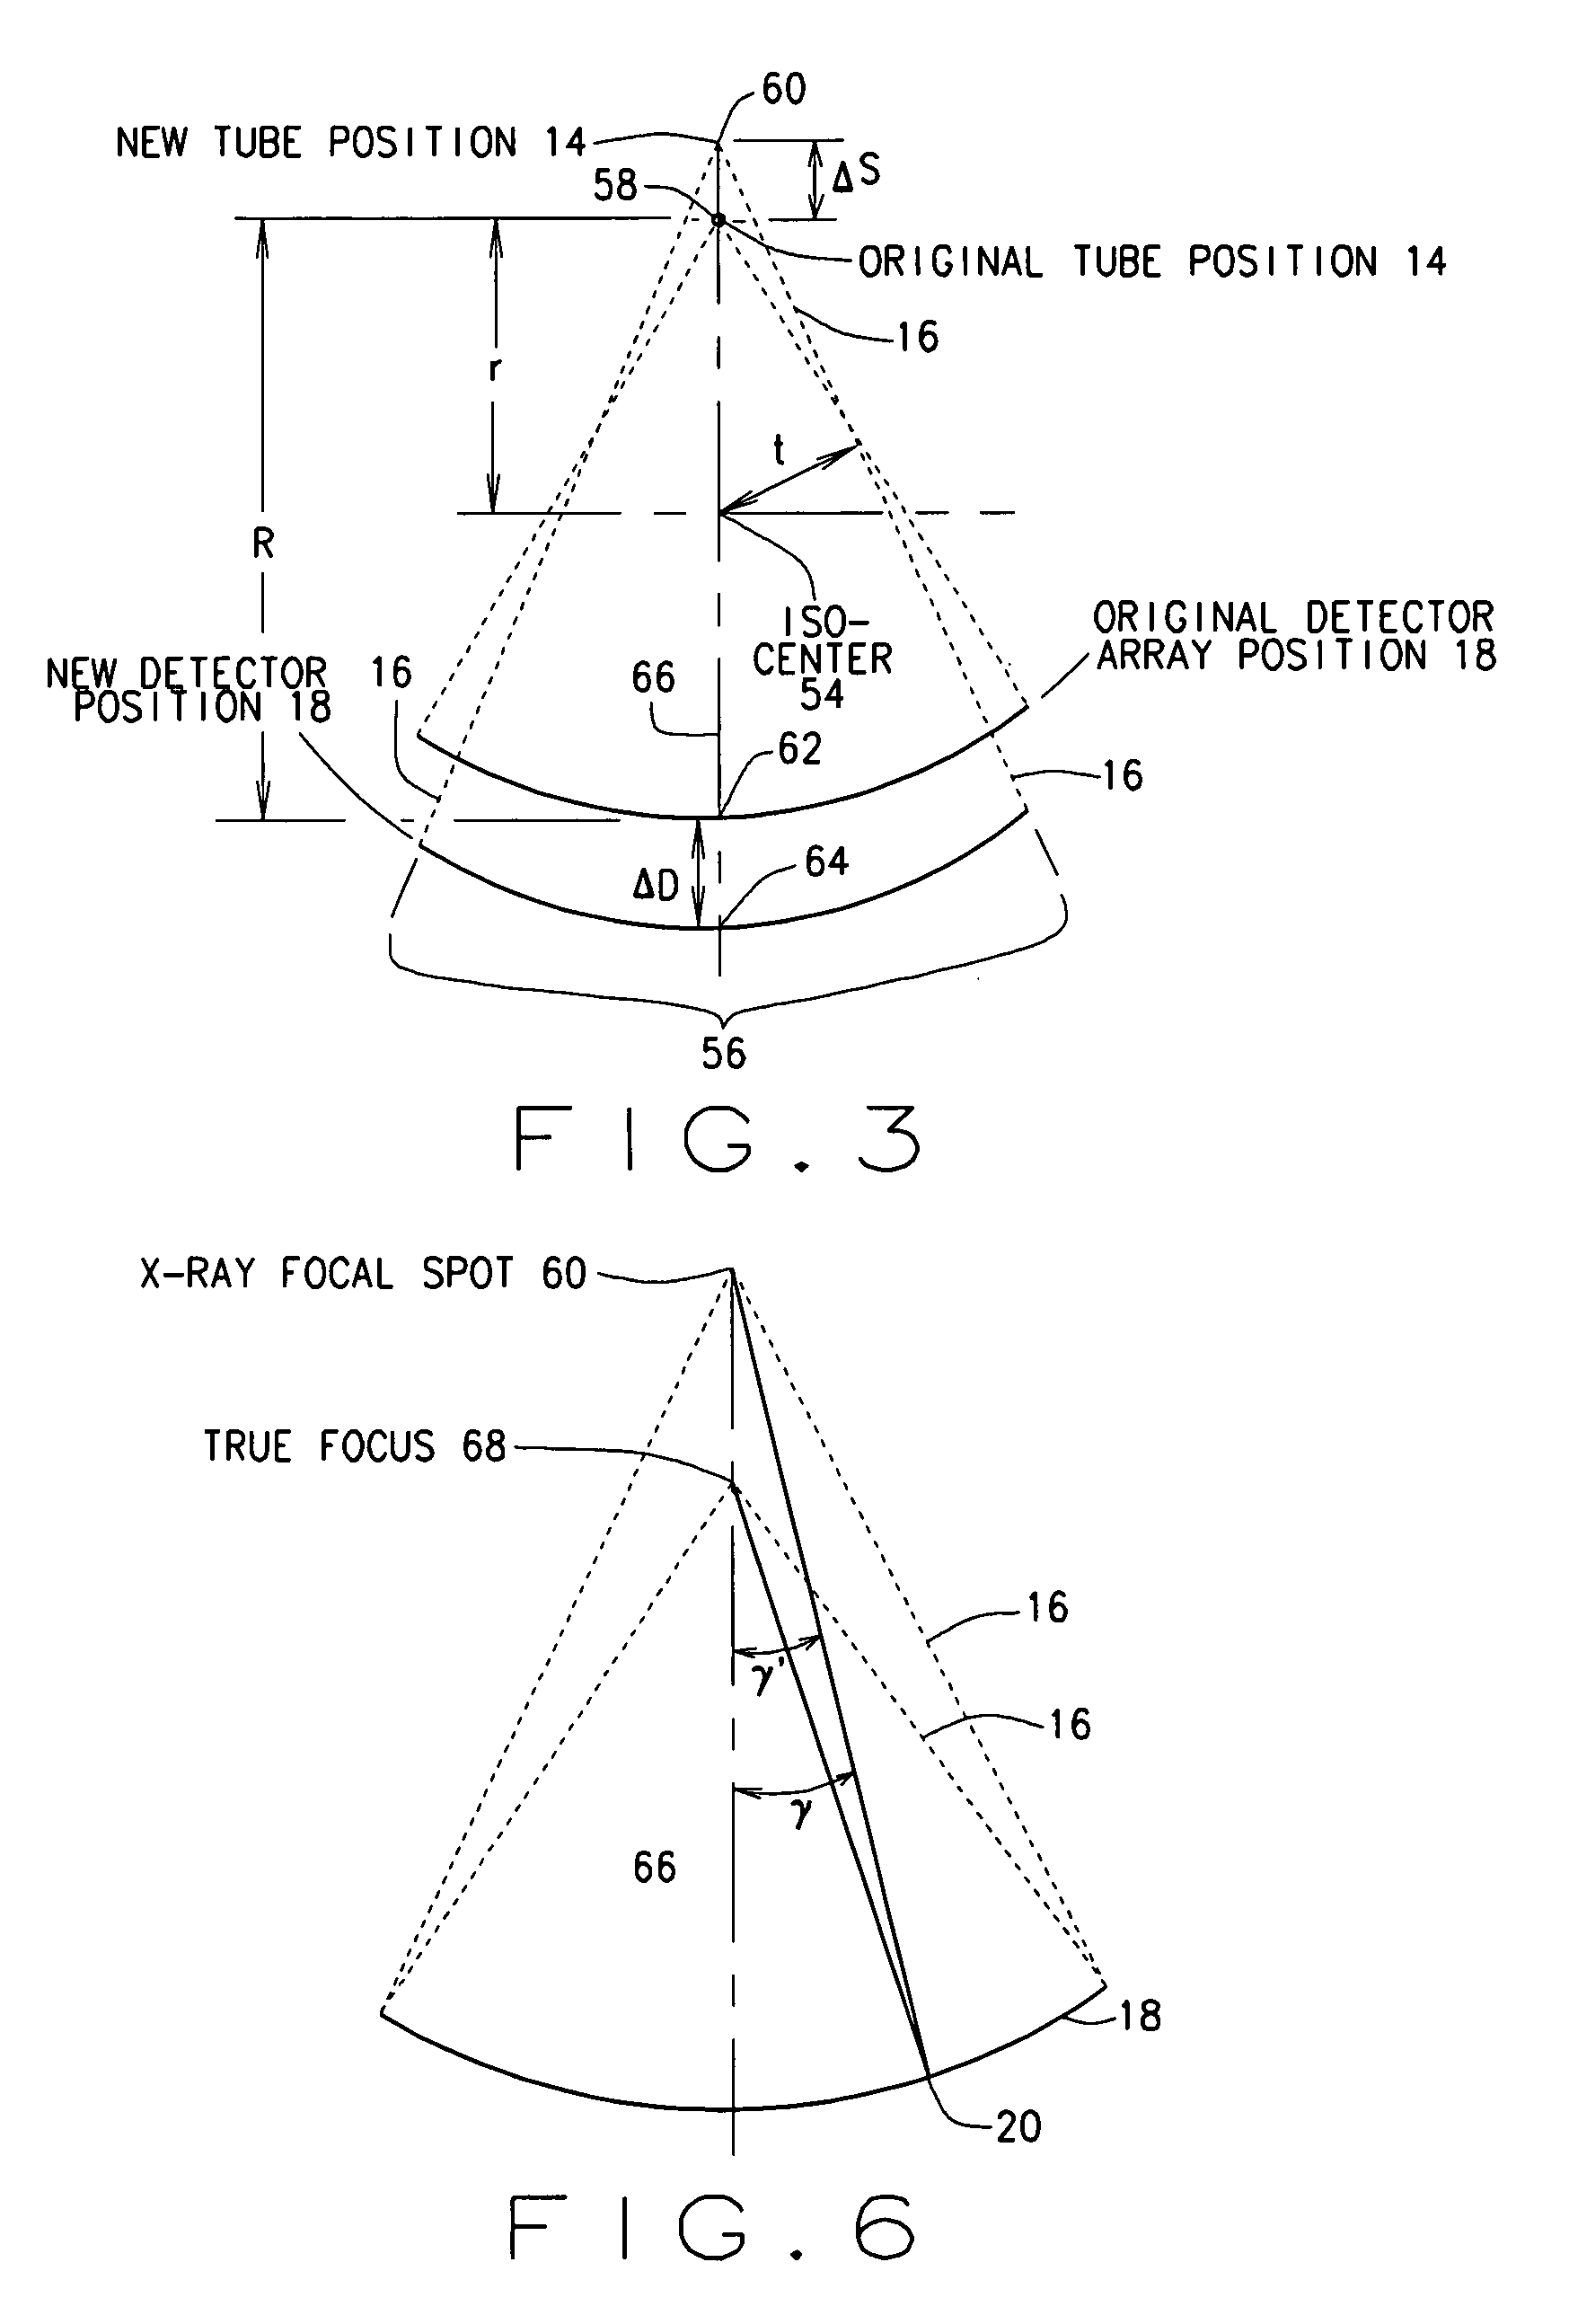 Methods and apparatus for artifact reduction in computed tomography imaging systems